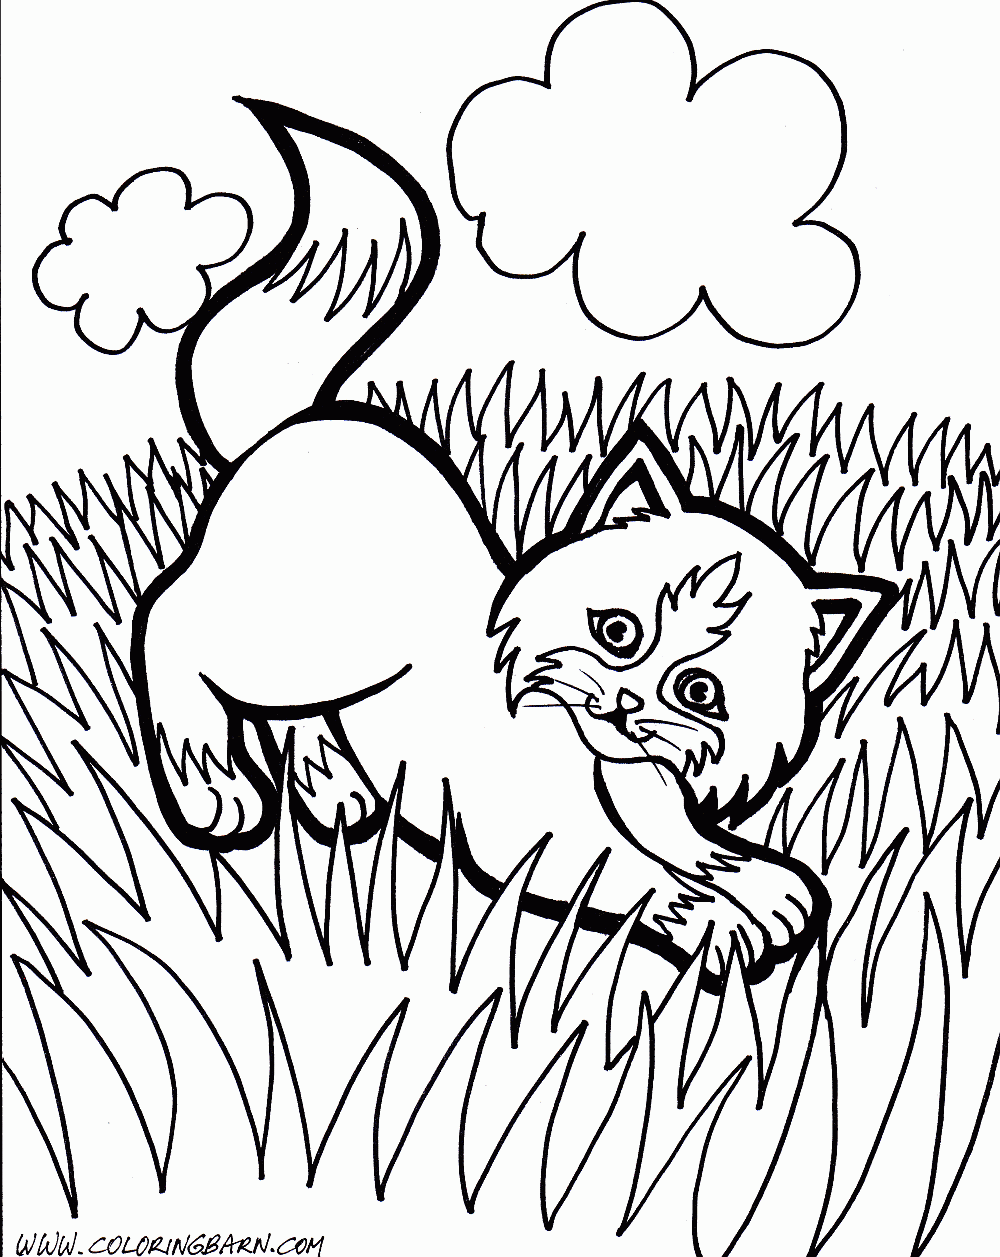 Kitten Coloring Pages Coloring pages for Girls